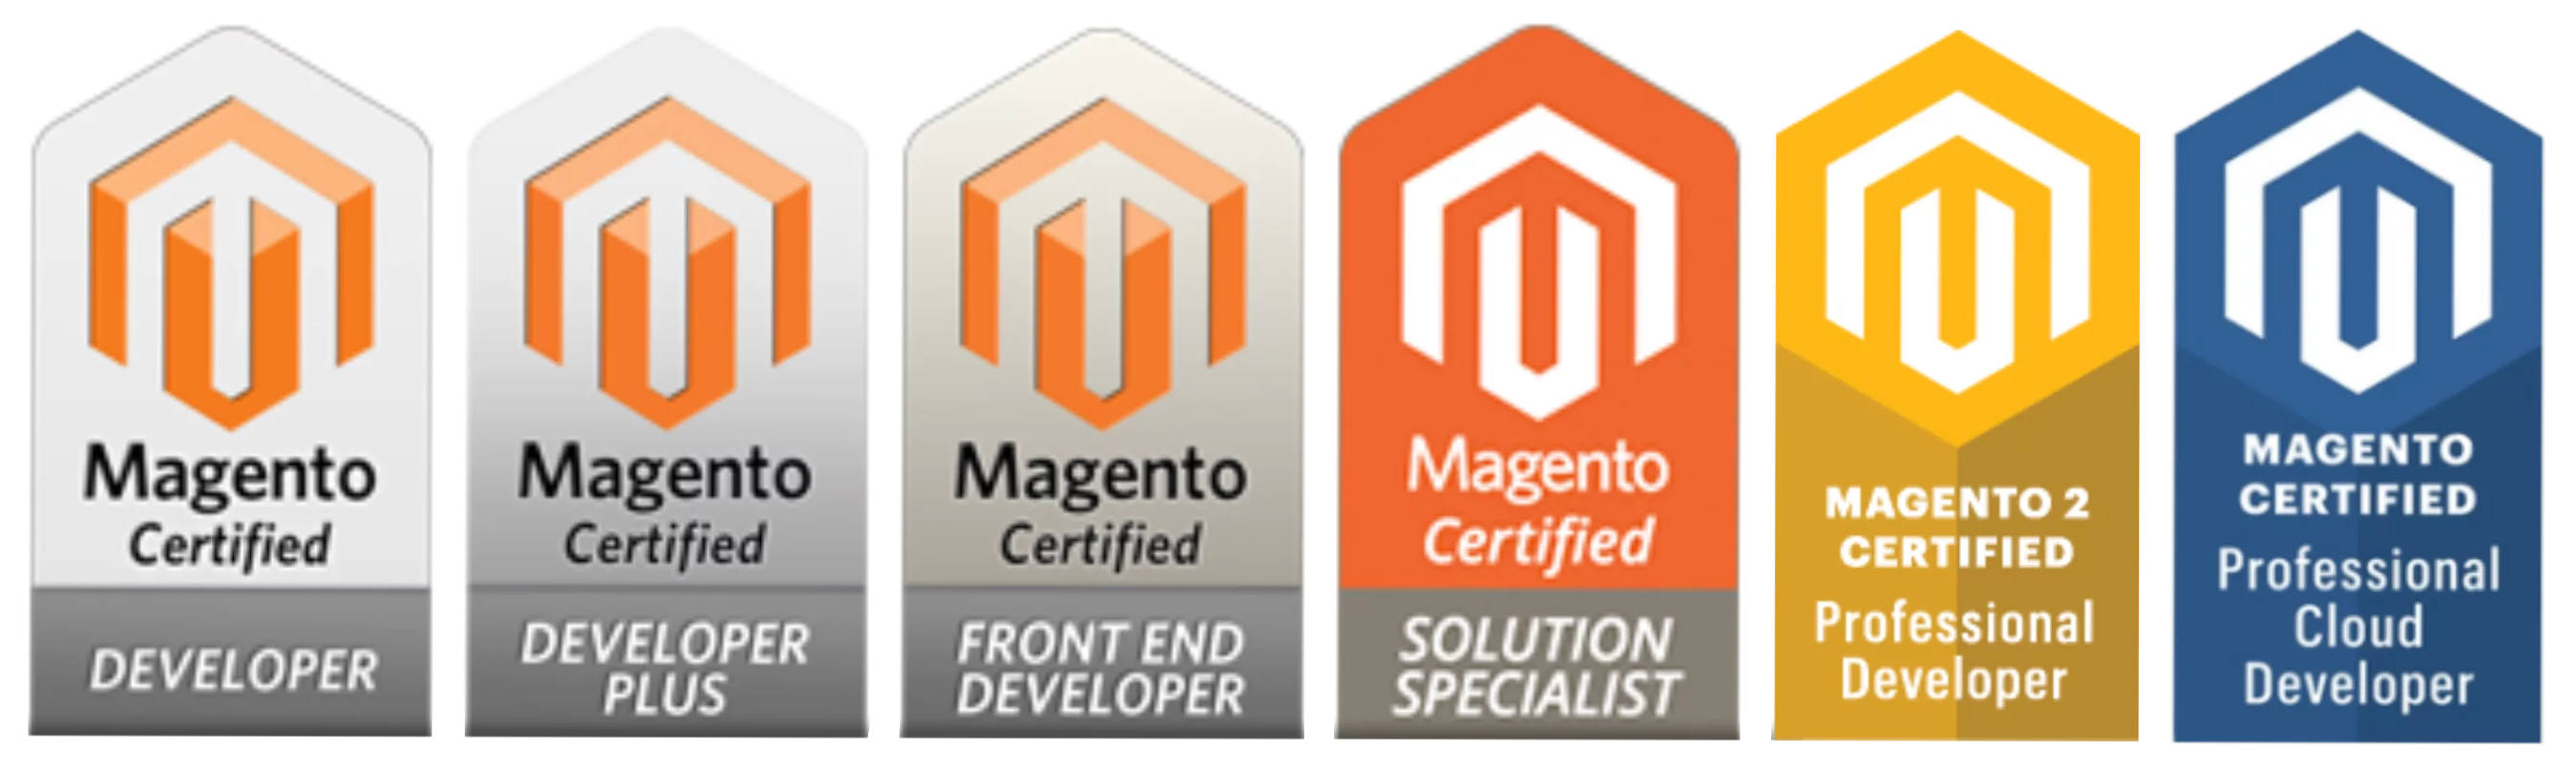 adobe magento certifications clever+zöger